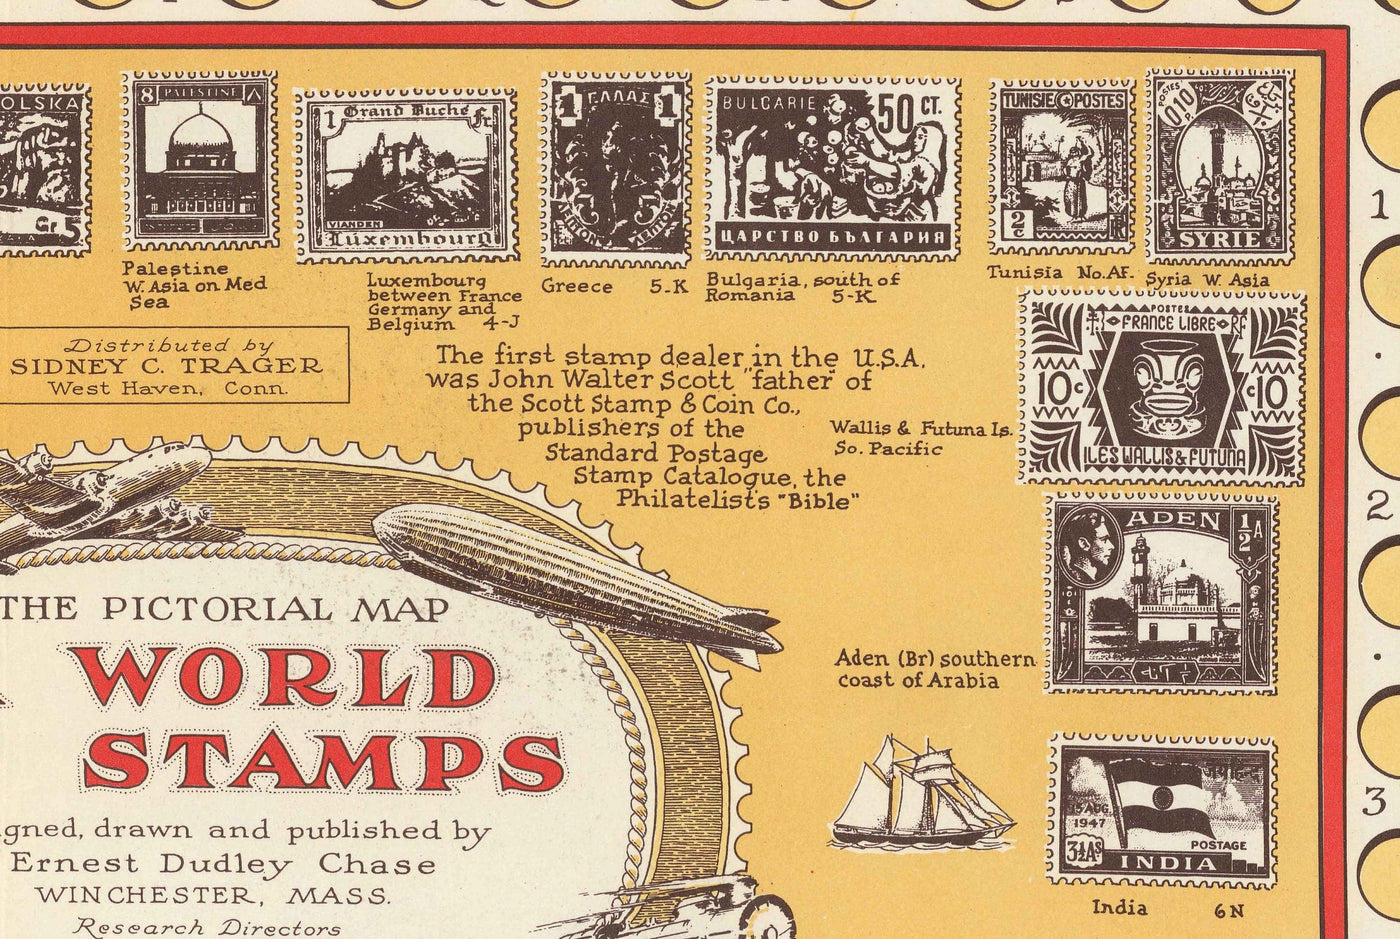 Old Stamp Map of the World, 1947 by E. Chase - Historical Post Office Atlas, Landmarks, Penny Black